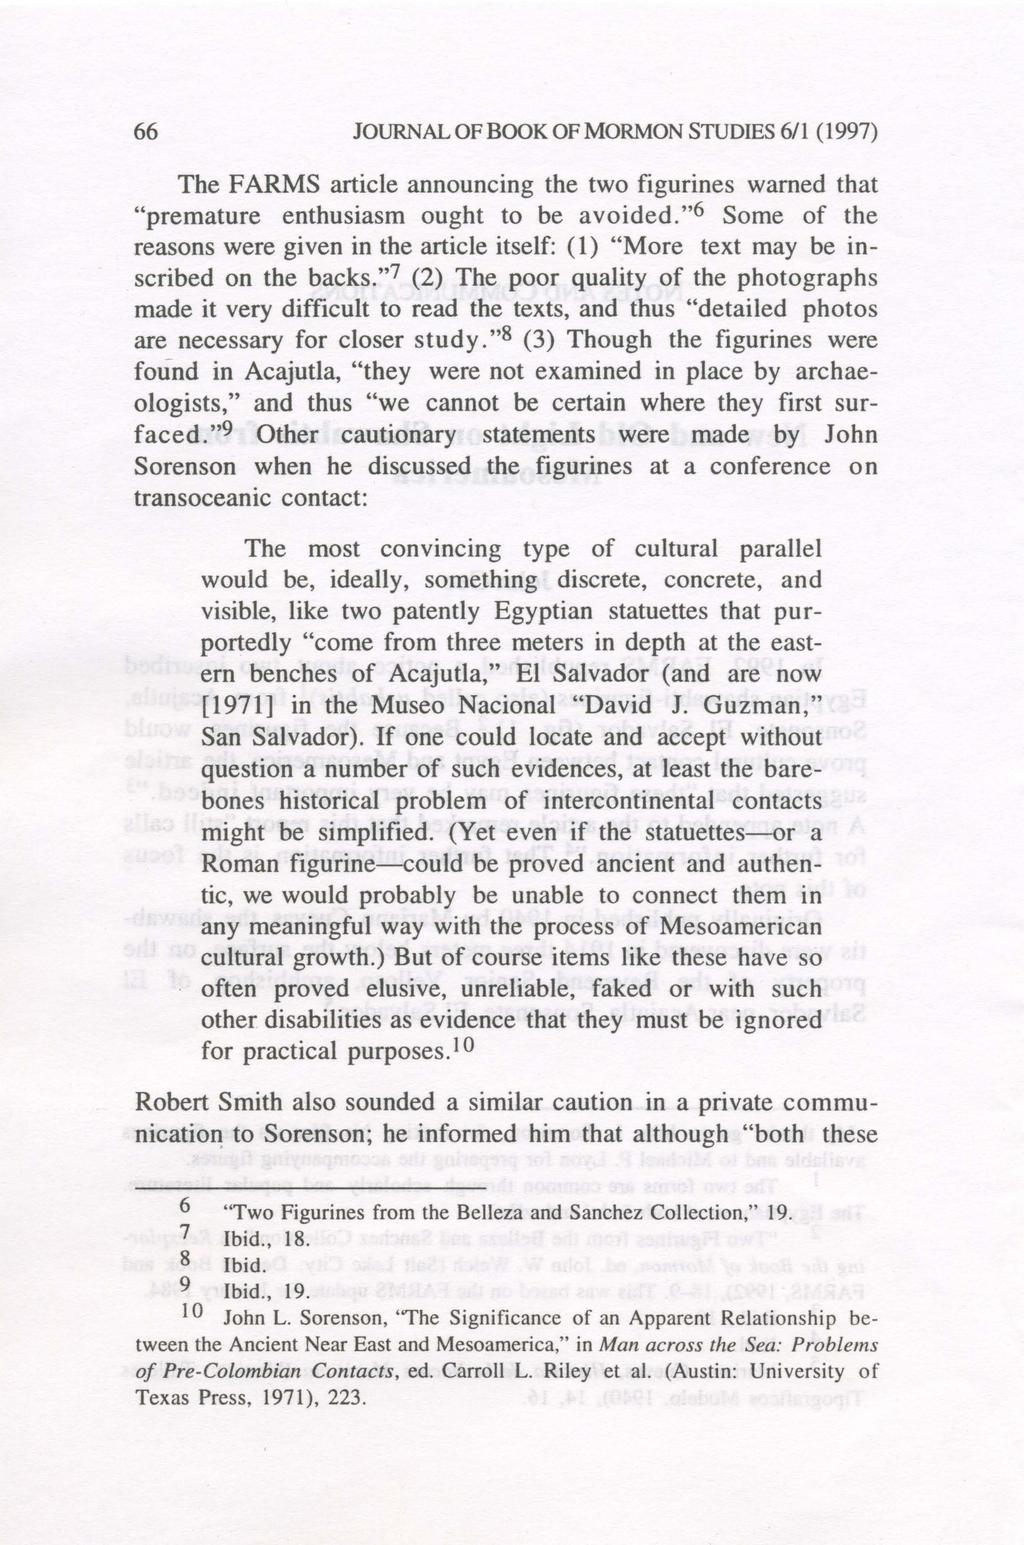 66 JOURNAL OF BOOK OF MORMON STUDIES 6/1 (1997) The FARMS article announcing the two figurines warned that "premature enthusiasm ought to be avoided.